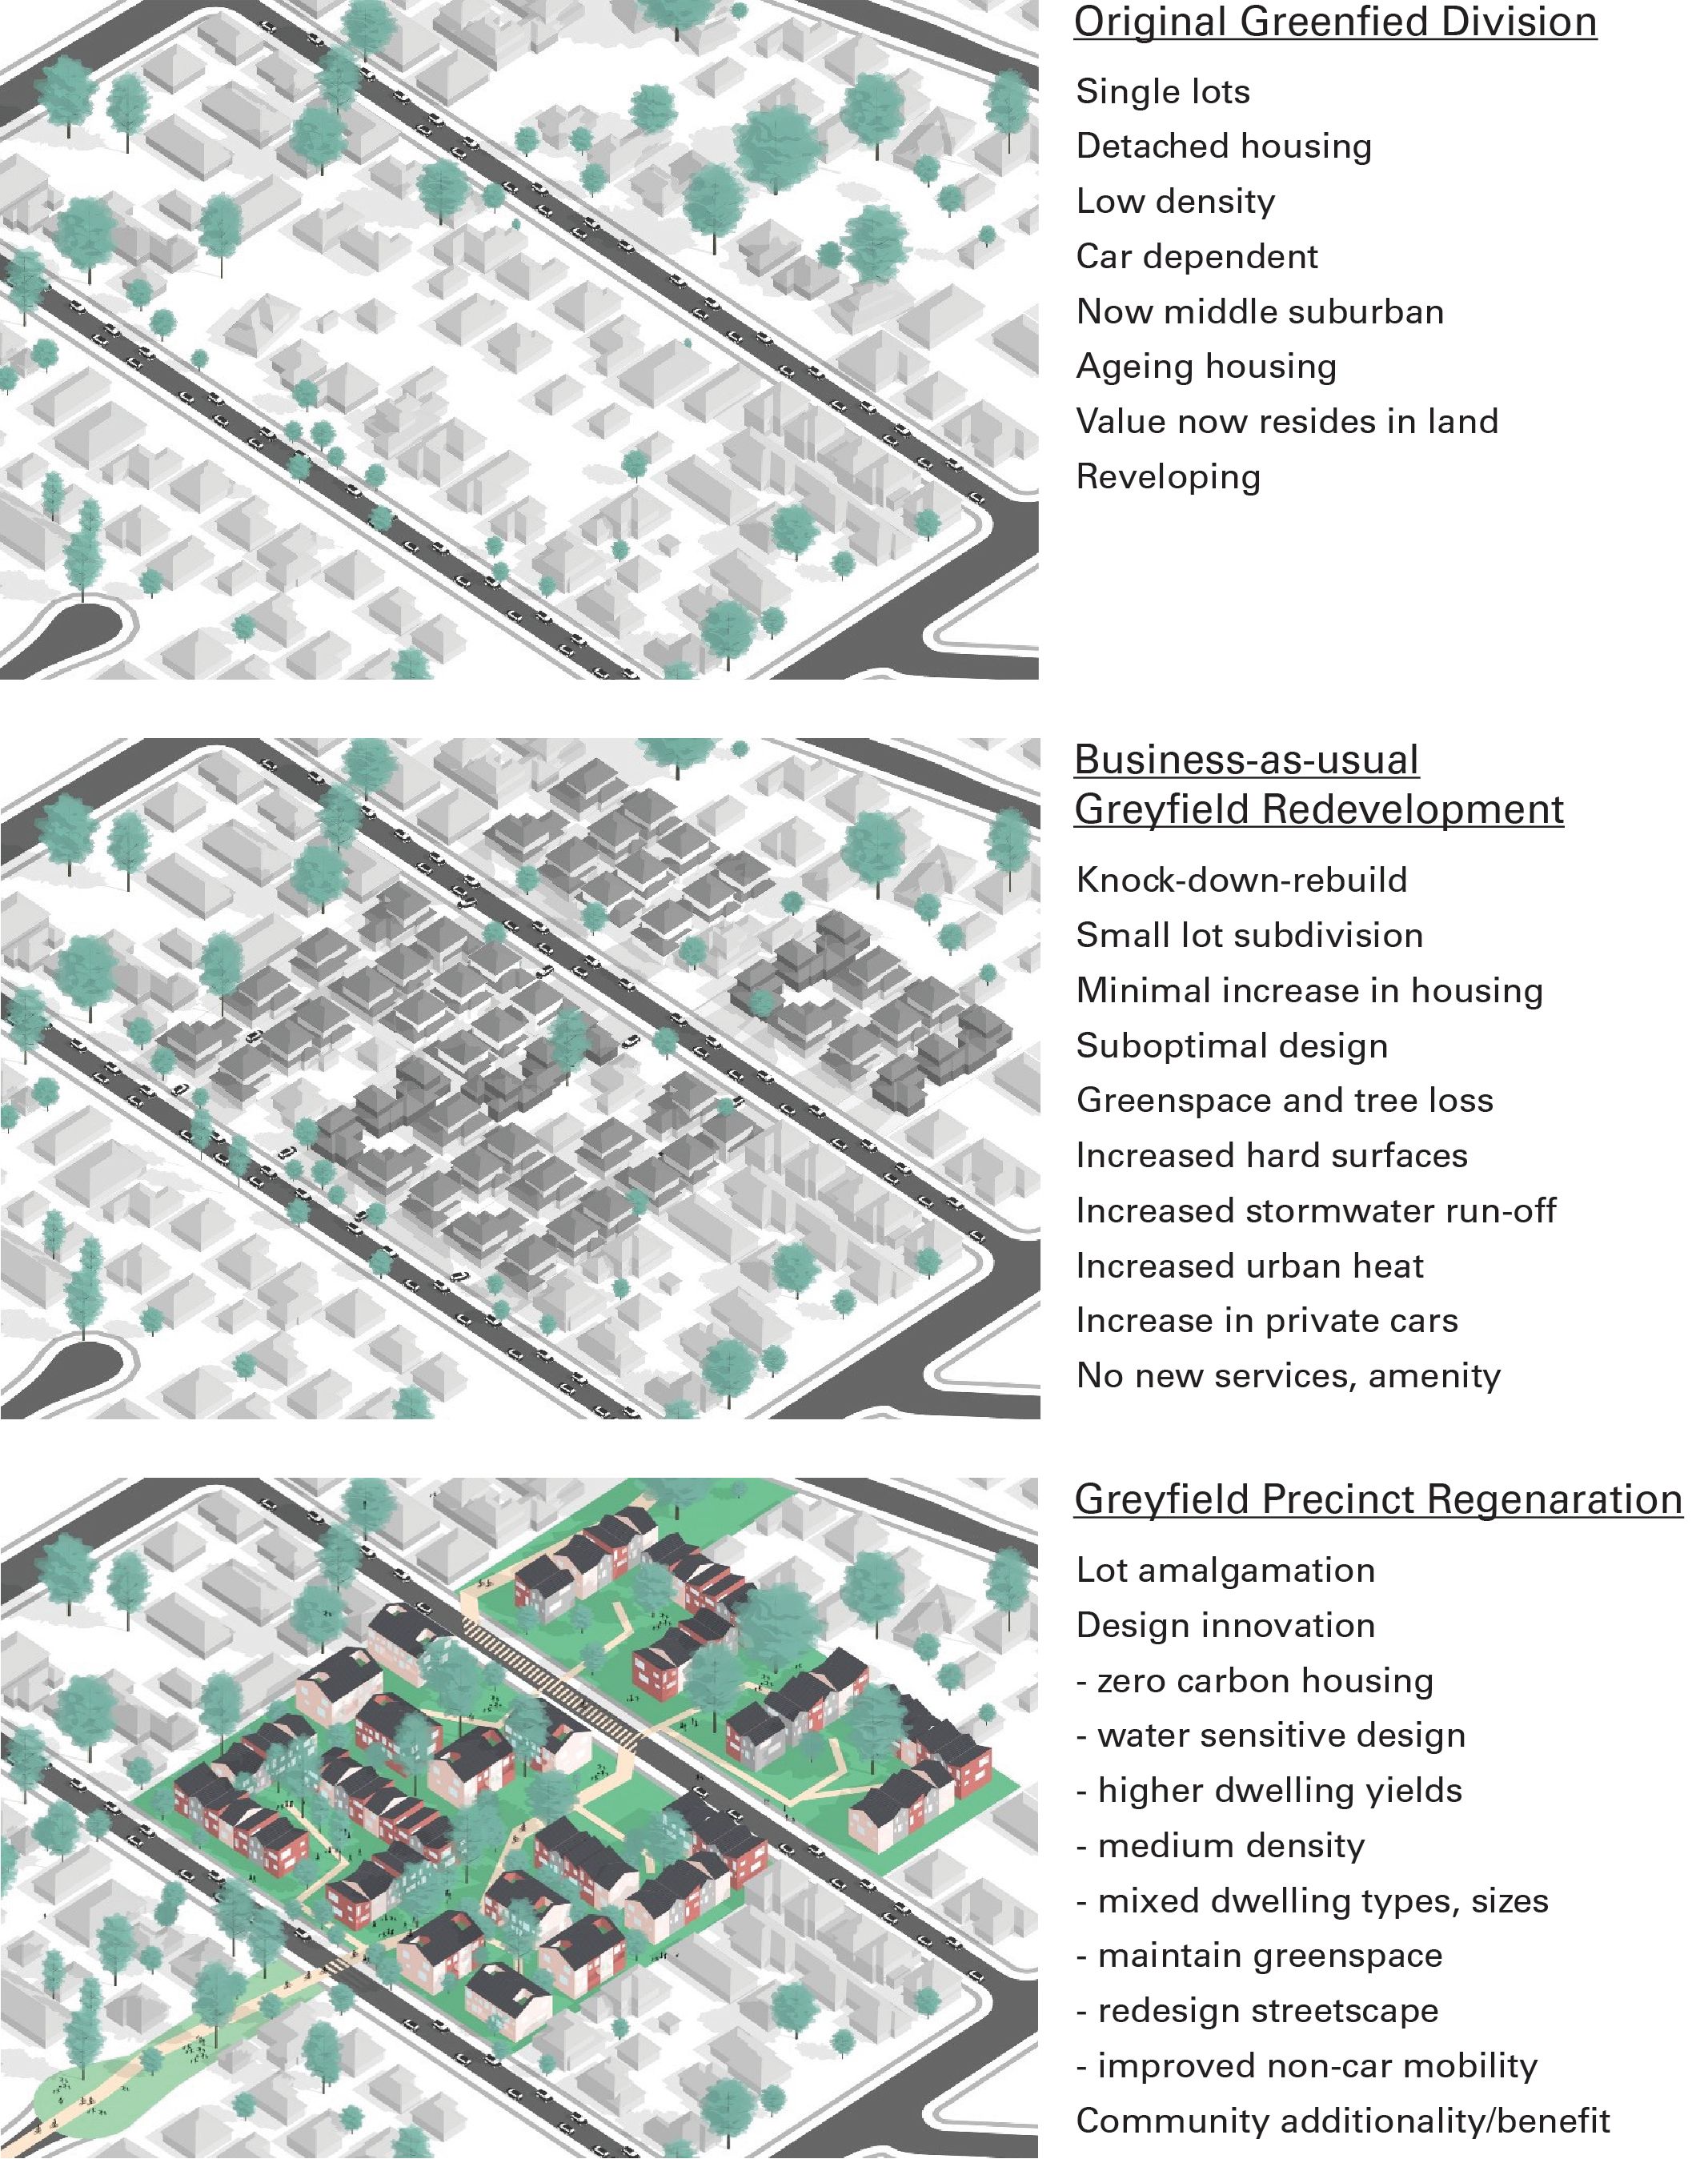 A comparison of three annotated images showing a birds-eye view of an original precinct layout, a business as usual redevelopment outcomes, and a greyfield precinct regeneration outcome